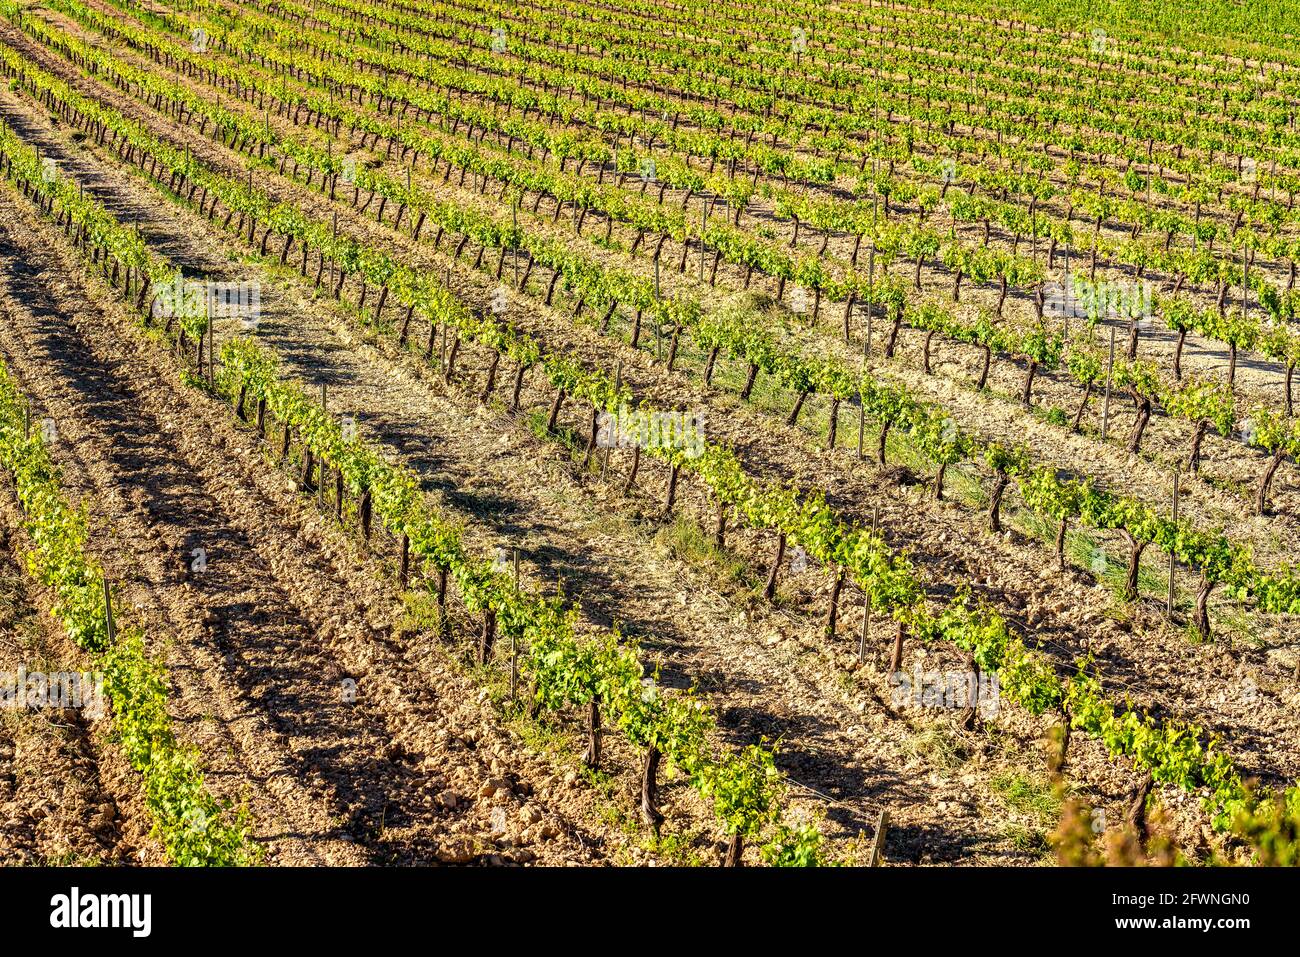 Close-up of a field of green vineyards in rows Stock Photo